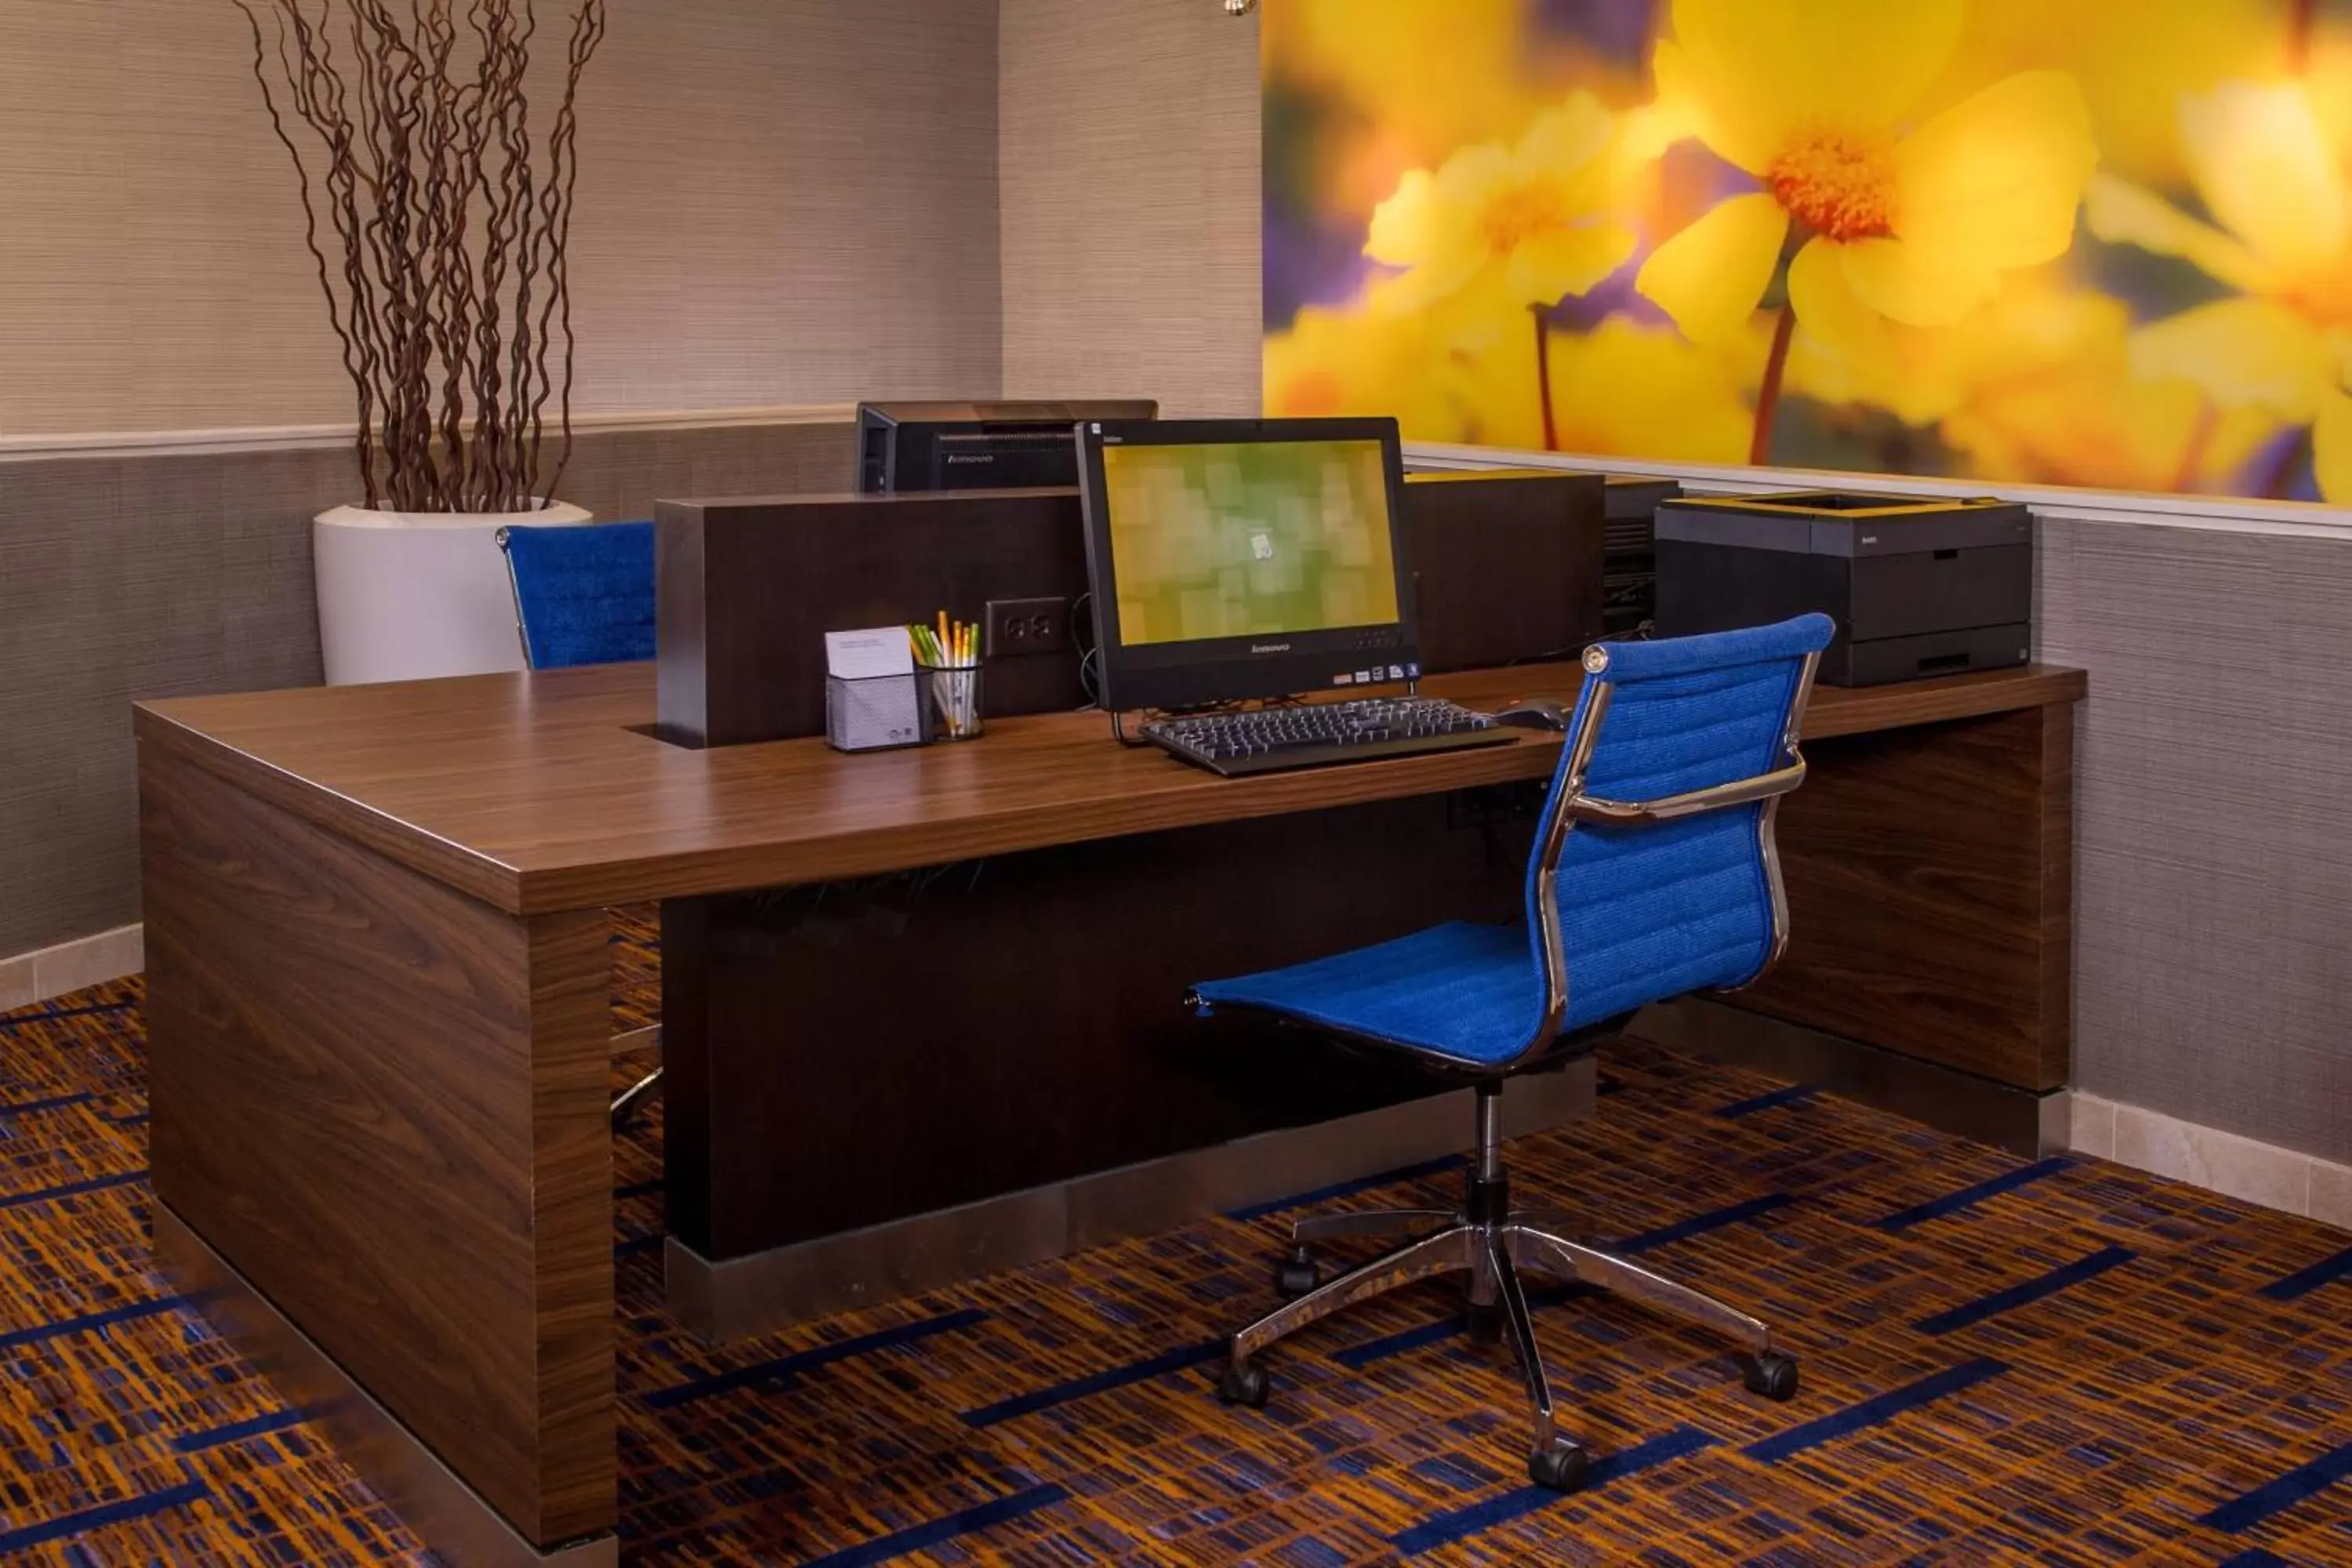 Business facilities in Courtyard by Marriott Richmond West